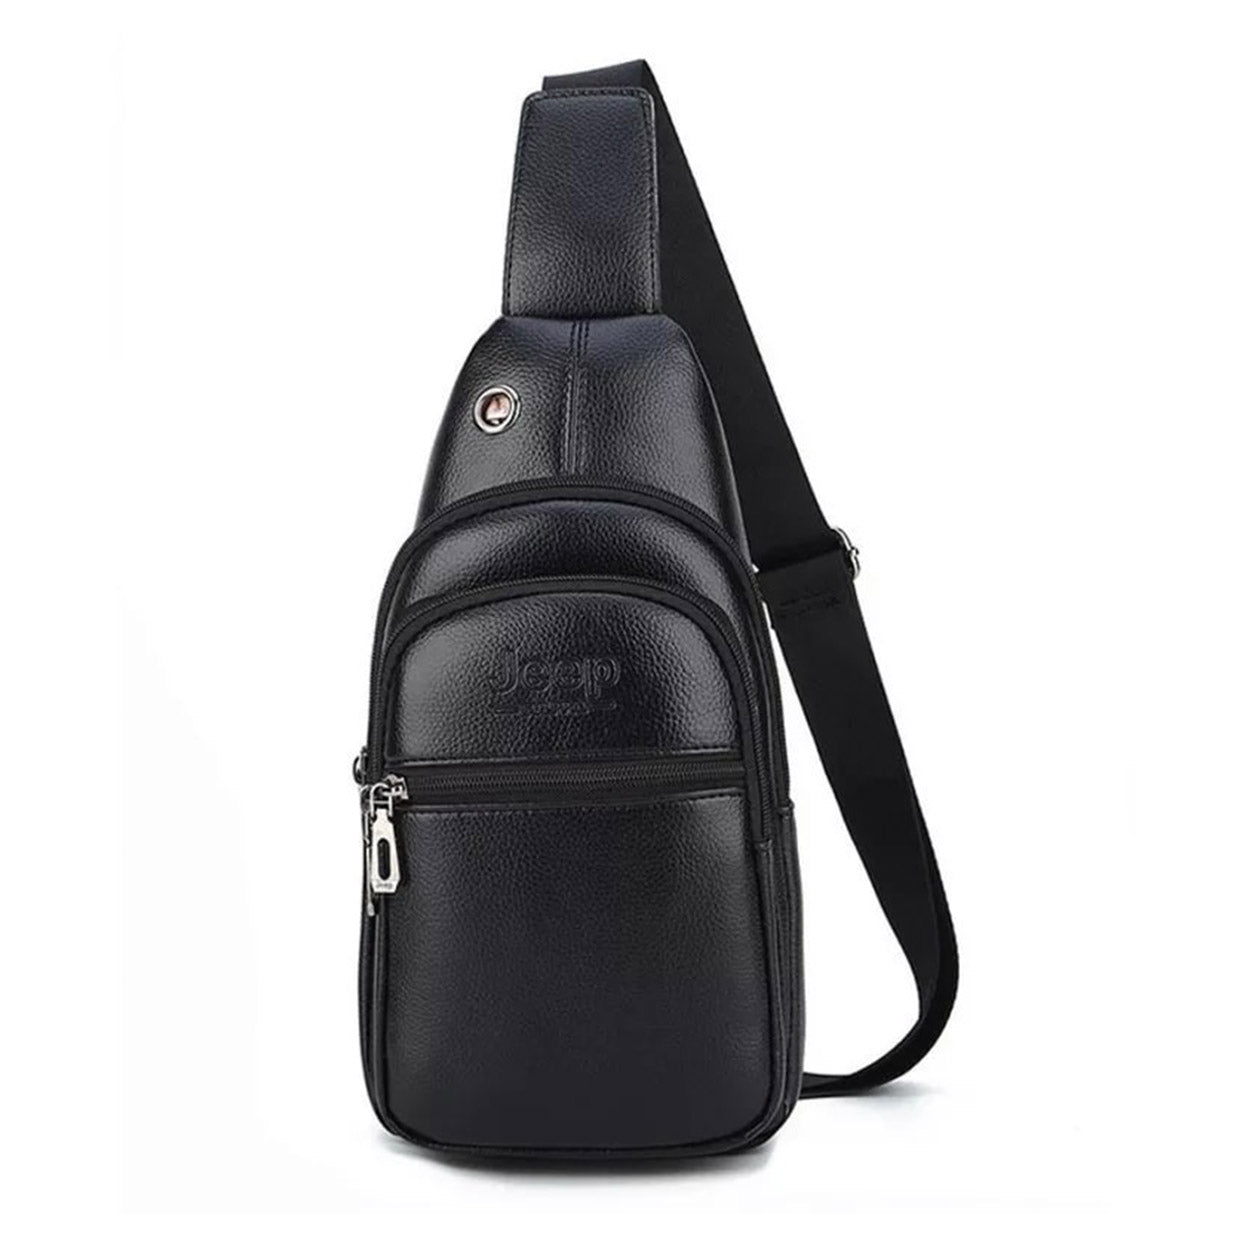 best sports jeep bags official website, best jeep shoulder bag original in dubai, jeep shoulder bag buluo, jeep tote bag, jeep bag original price online zappy store, jeep bag leather near to me , best crossbody sports bag black, Sports leisure cross body bag black in dubai online